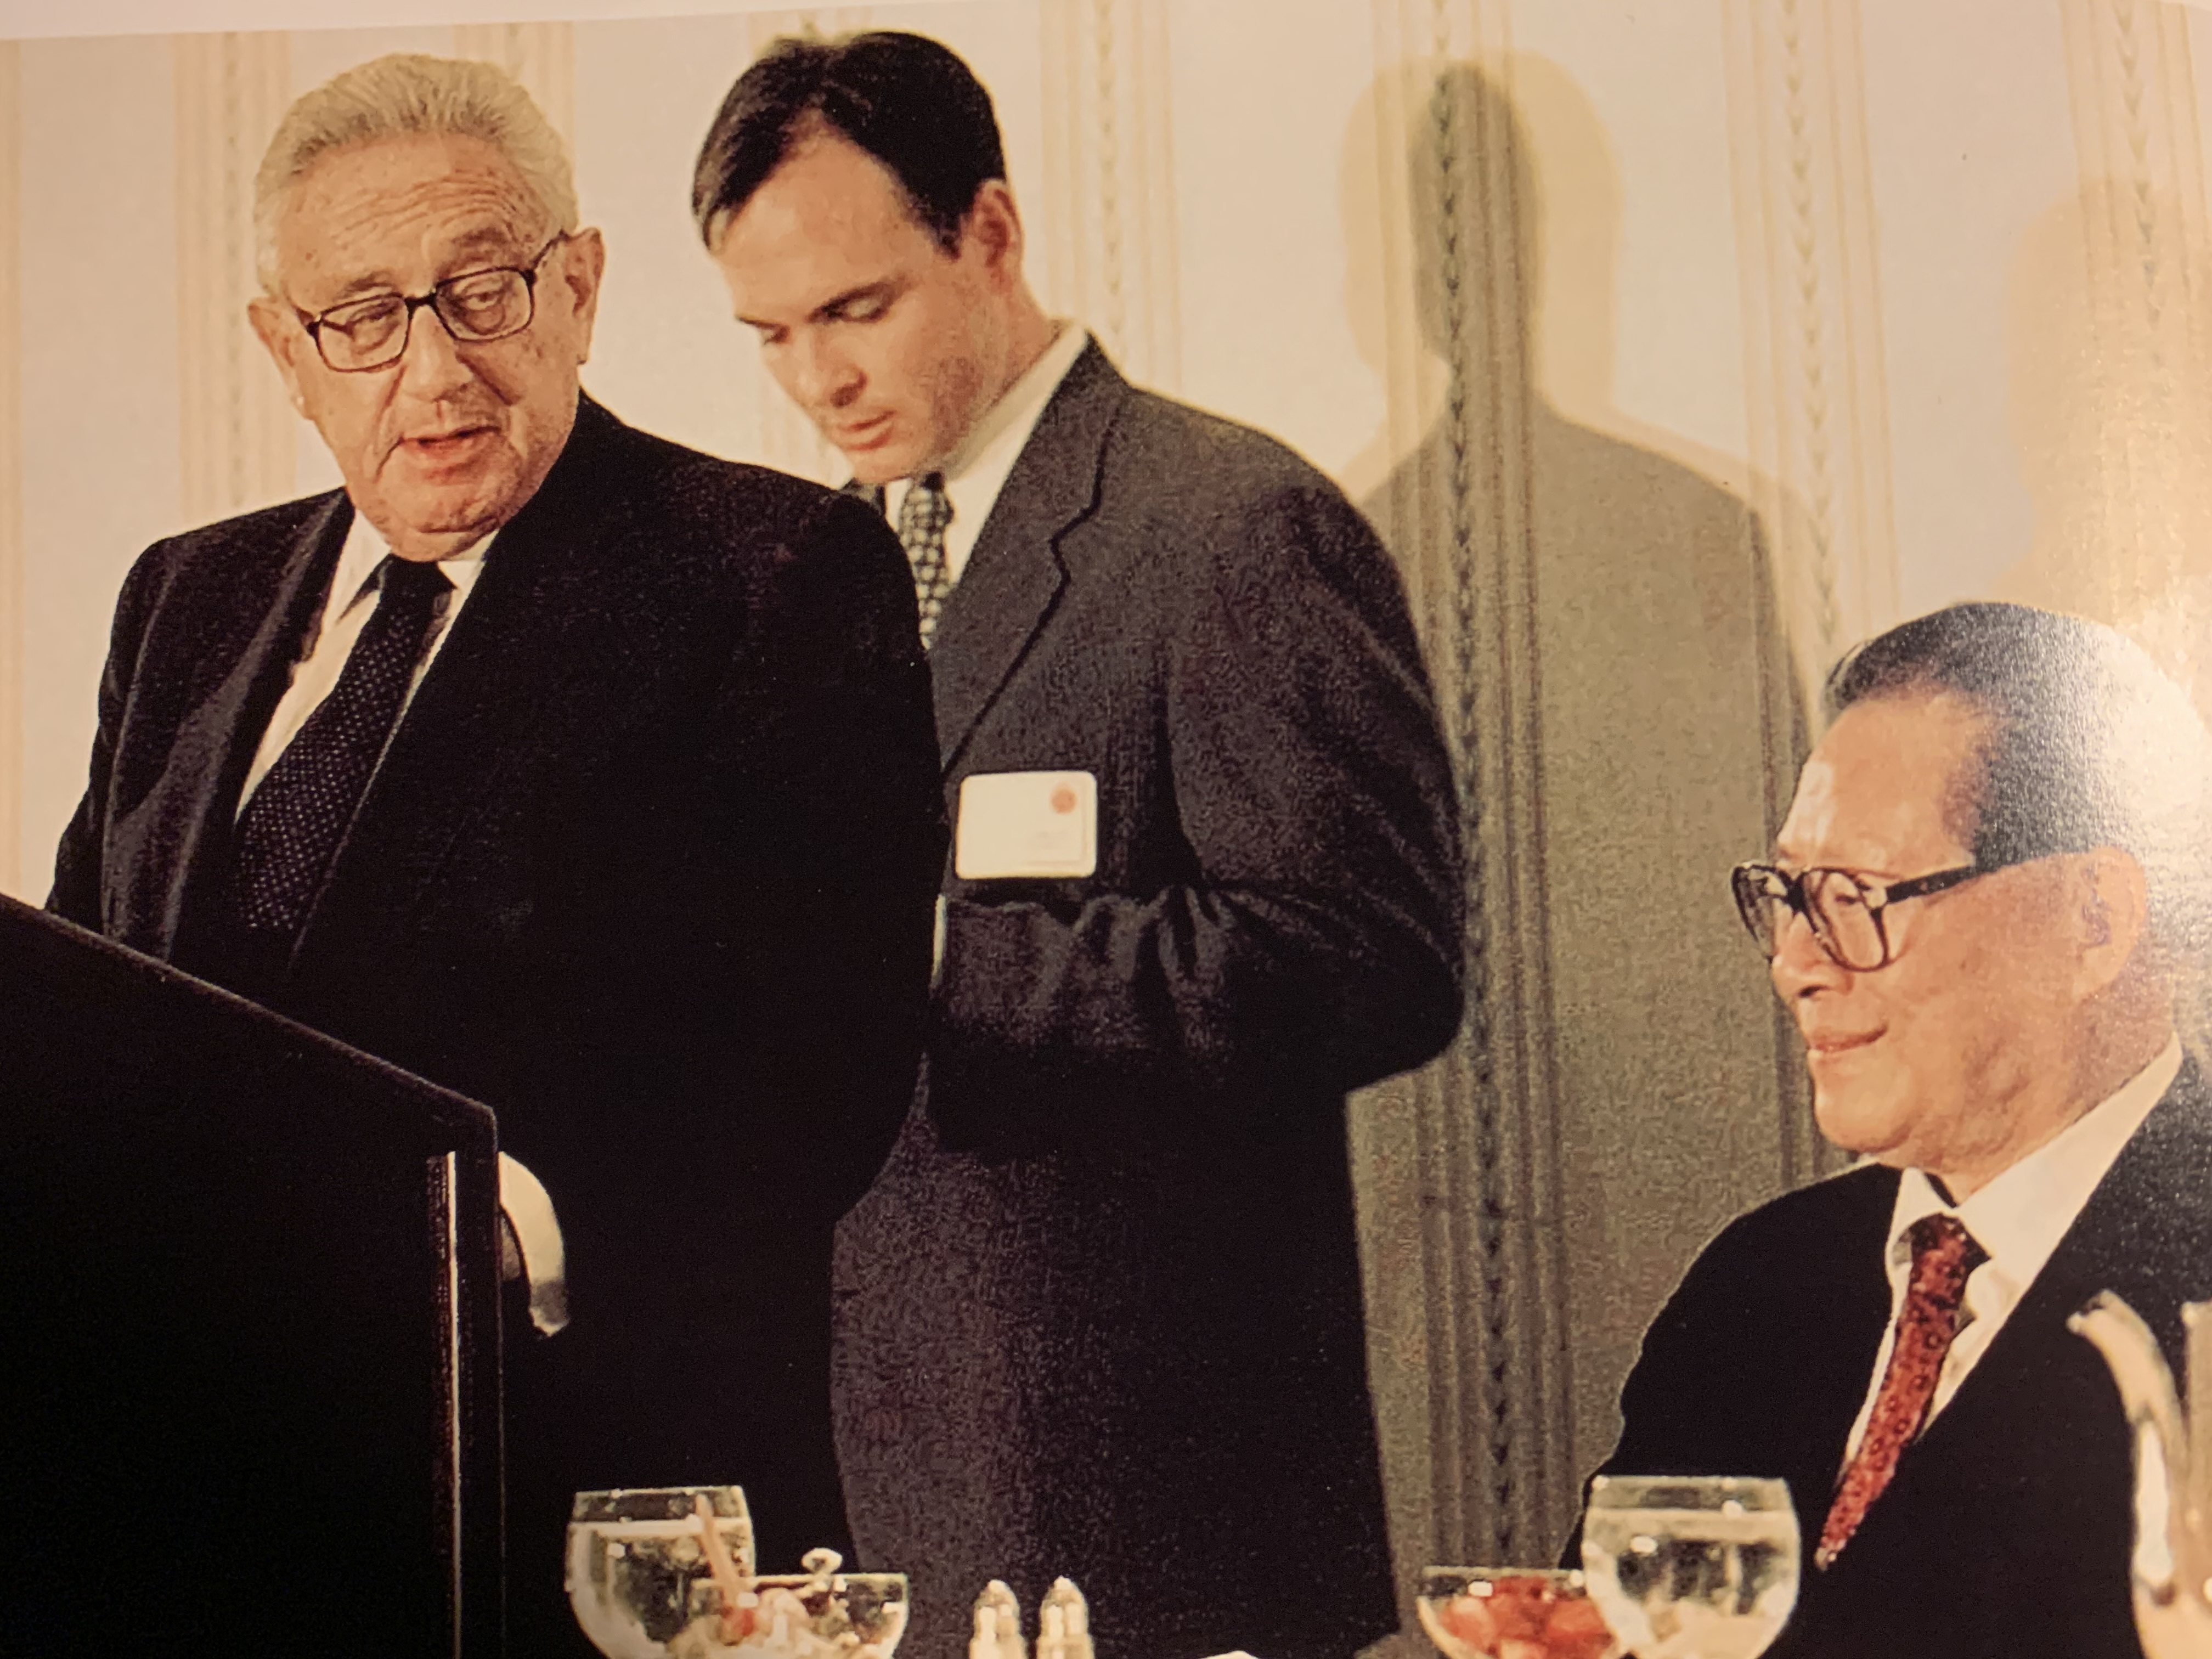 Robert Daly, pictured interpreting for Henry Kissinger and Jiang Zemin in 1997, said Kissinger was “one of the last giants”. Photo: Supplied by Robert Daly